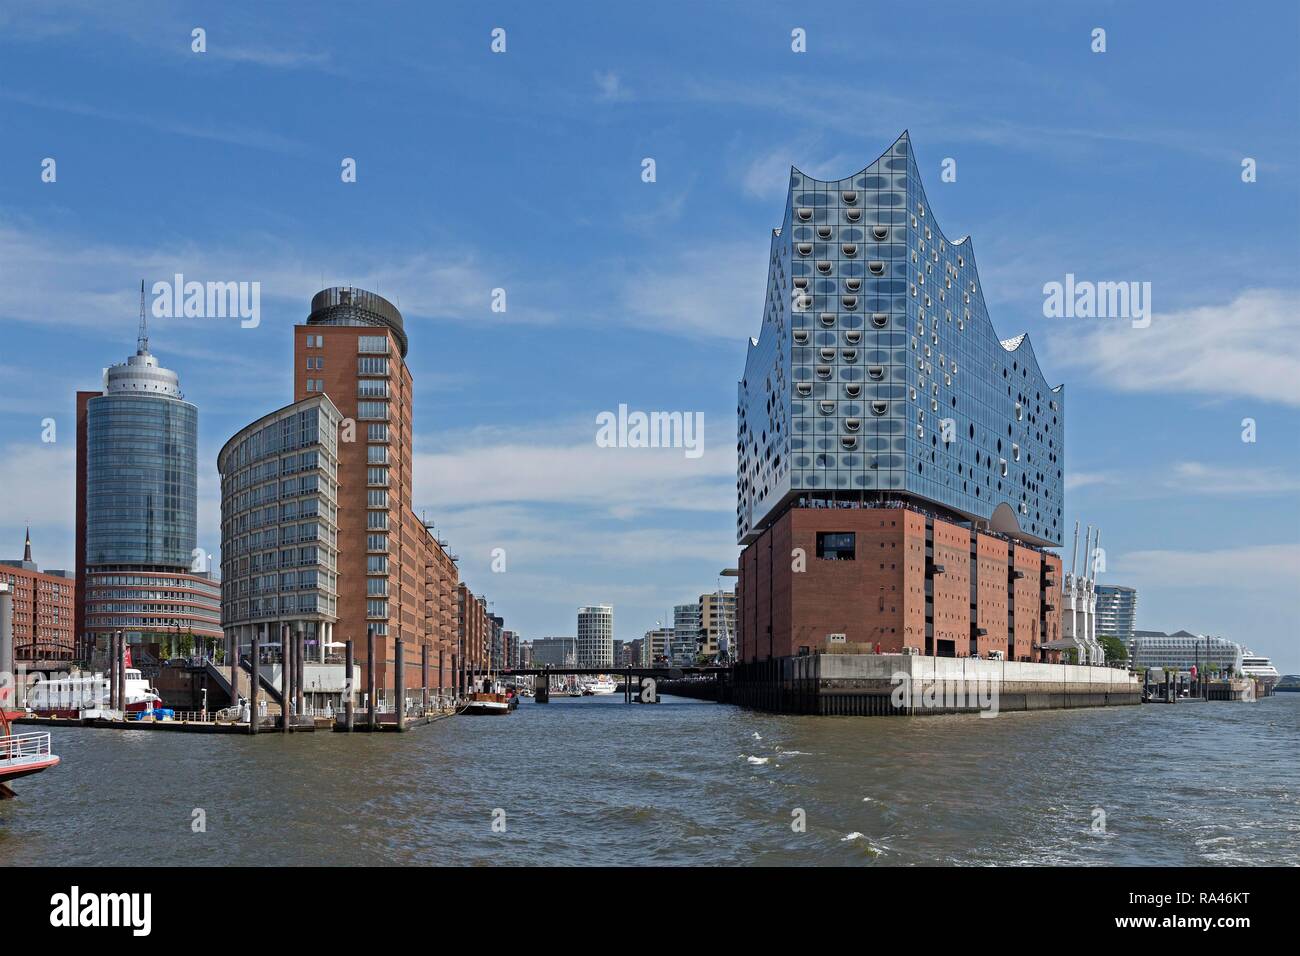 Elbe Philharmonic Hall, HafenCity, Hambourg, Allemagne Banque D'Images